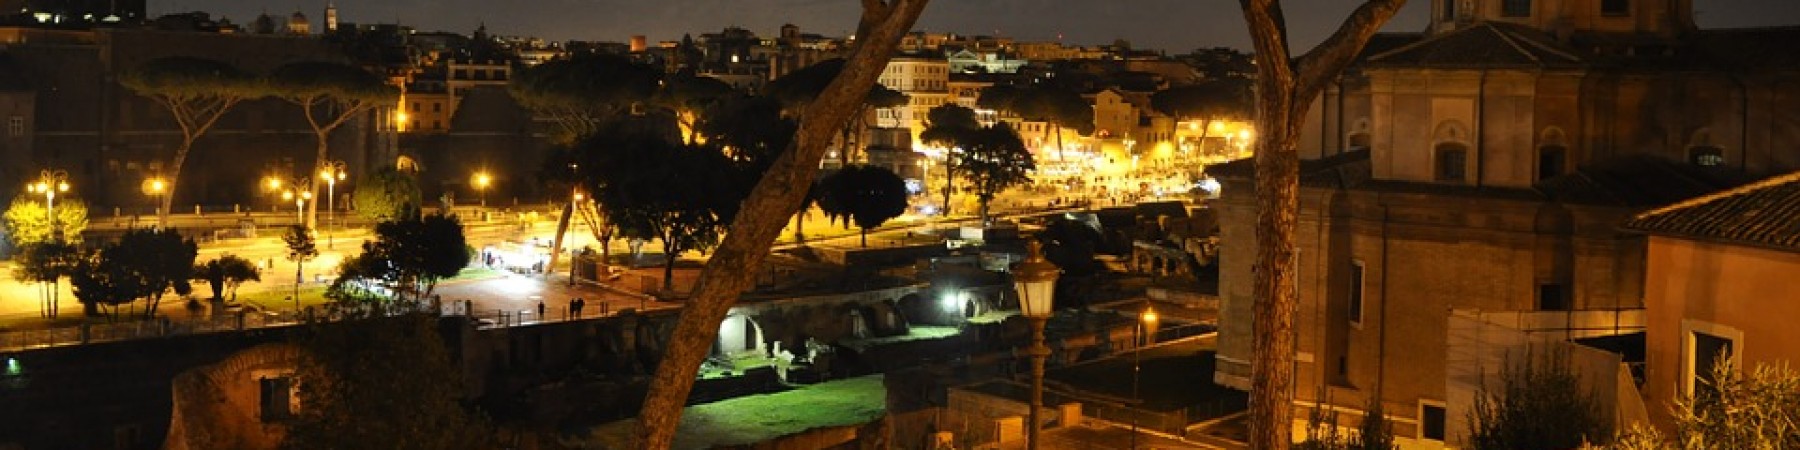 PRIVATE TOUR- Rome's most evocative squares by Night